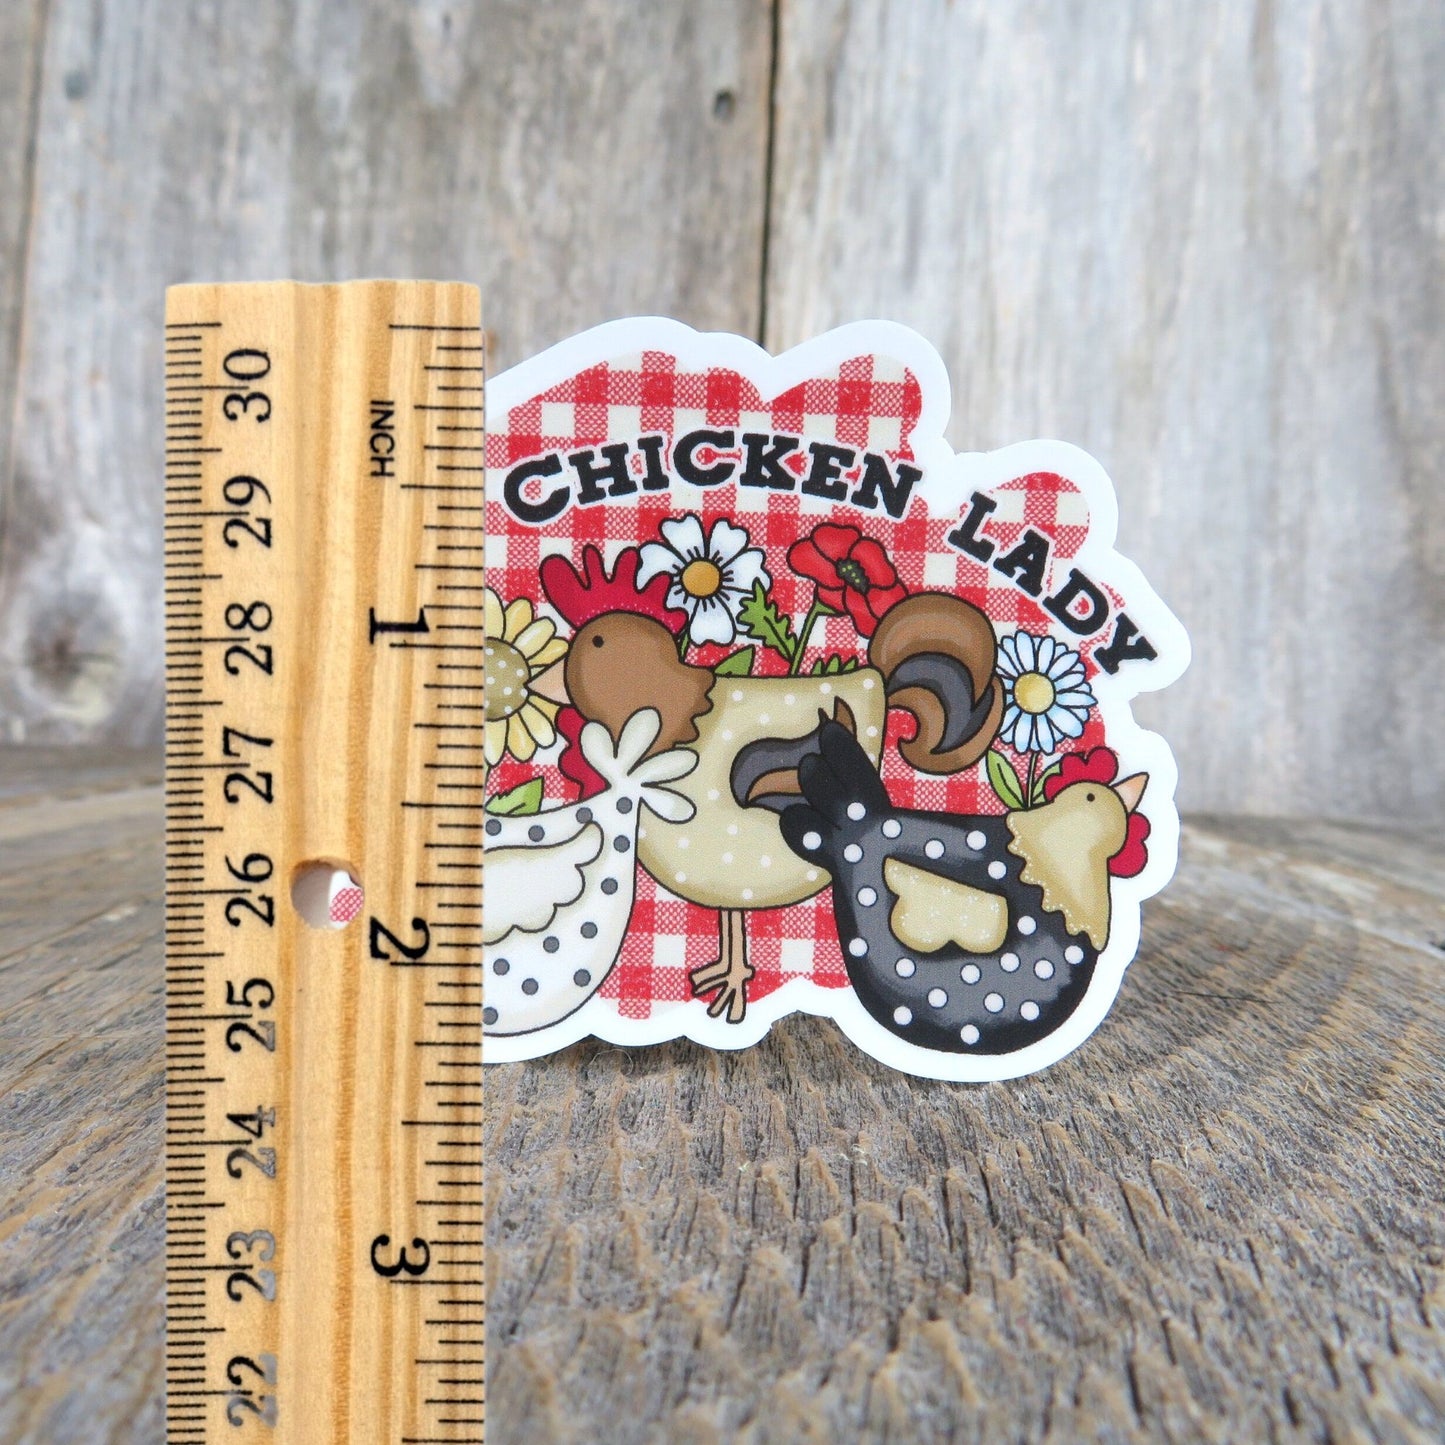 The Chicken Lady Sticker Waterproof Urban Farming Calico Country Style Full Color Raising Chickens